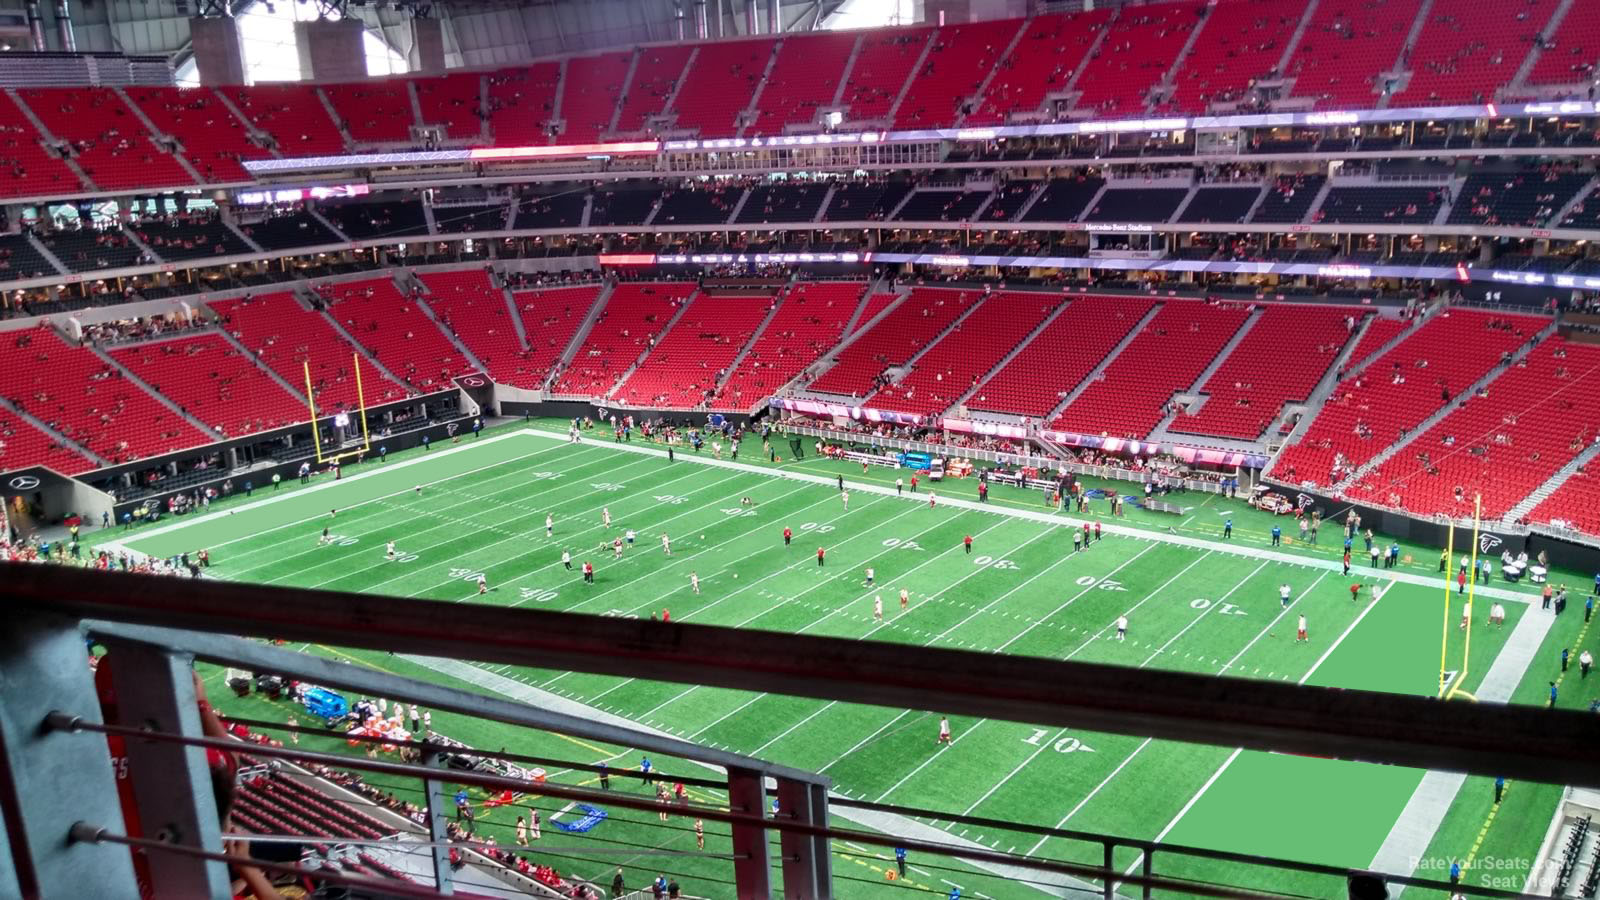 section 306, row 4 seat view  for football - mercedes-benz stadium